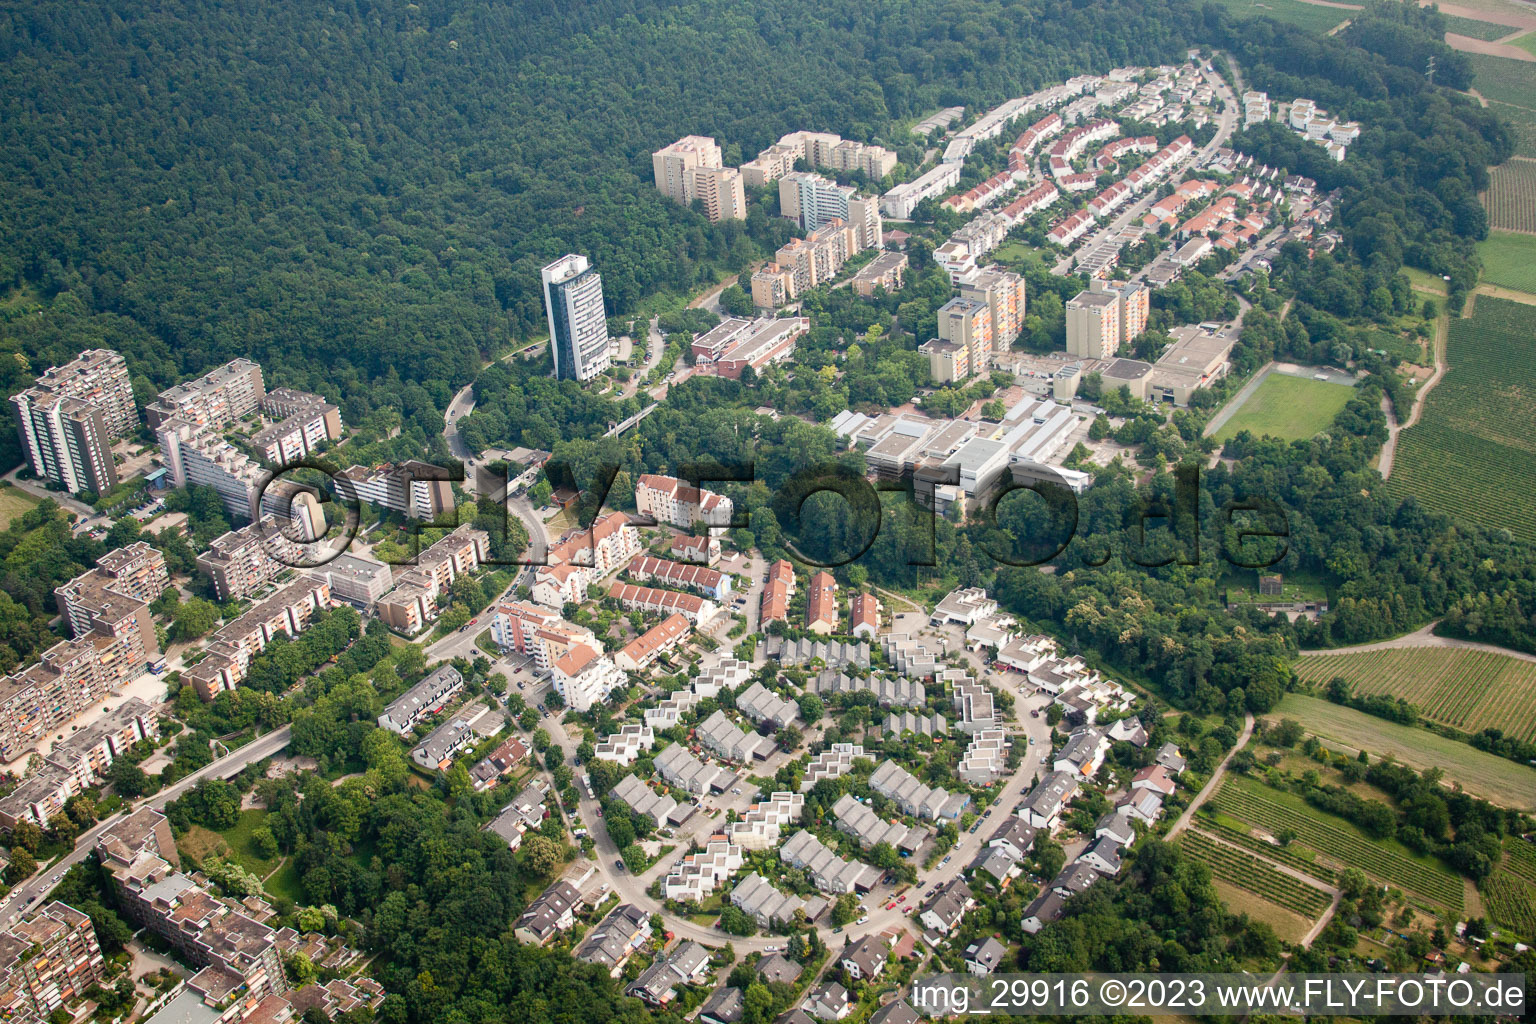 HD-Emmertsgrund in the district Emmertsgrund in Heidelberg in the state Baden-Wuerttemberg, Germany from the drone perspective